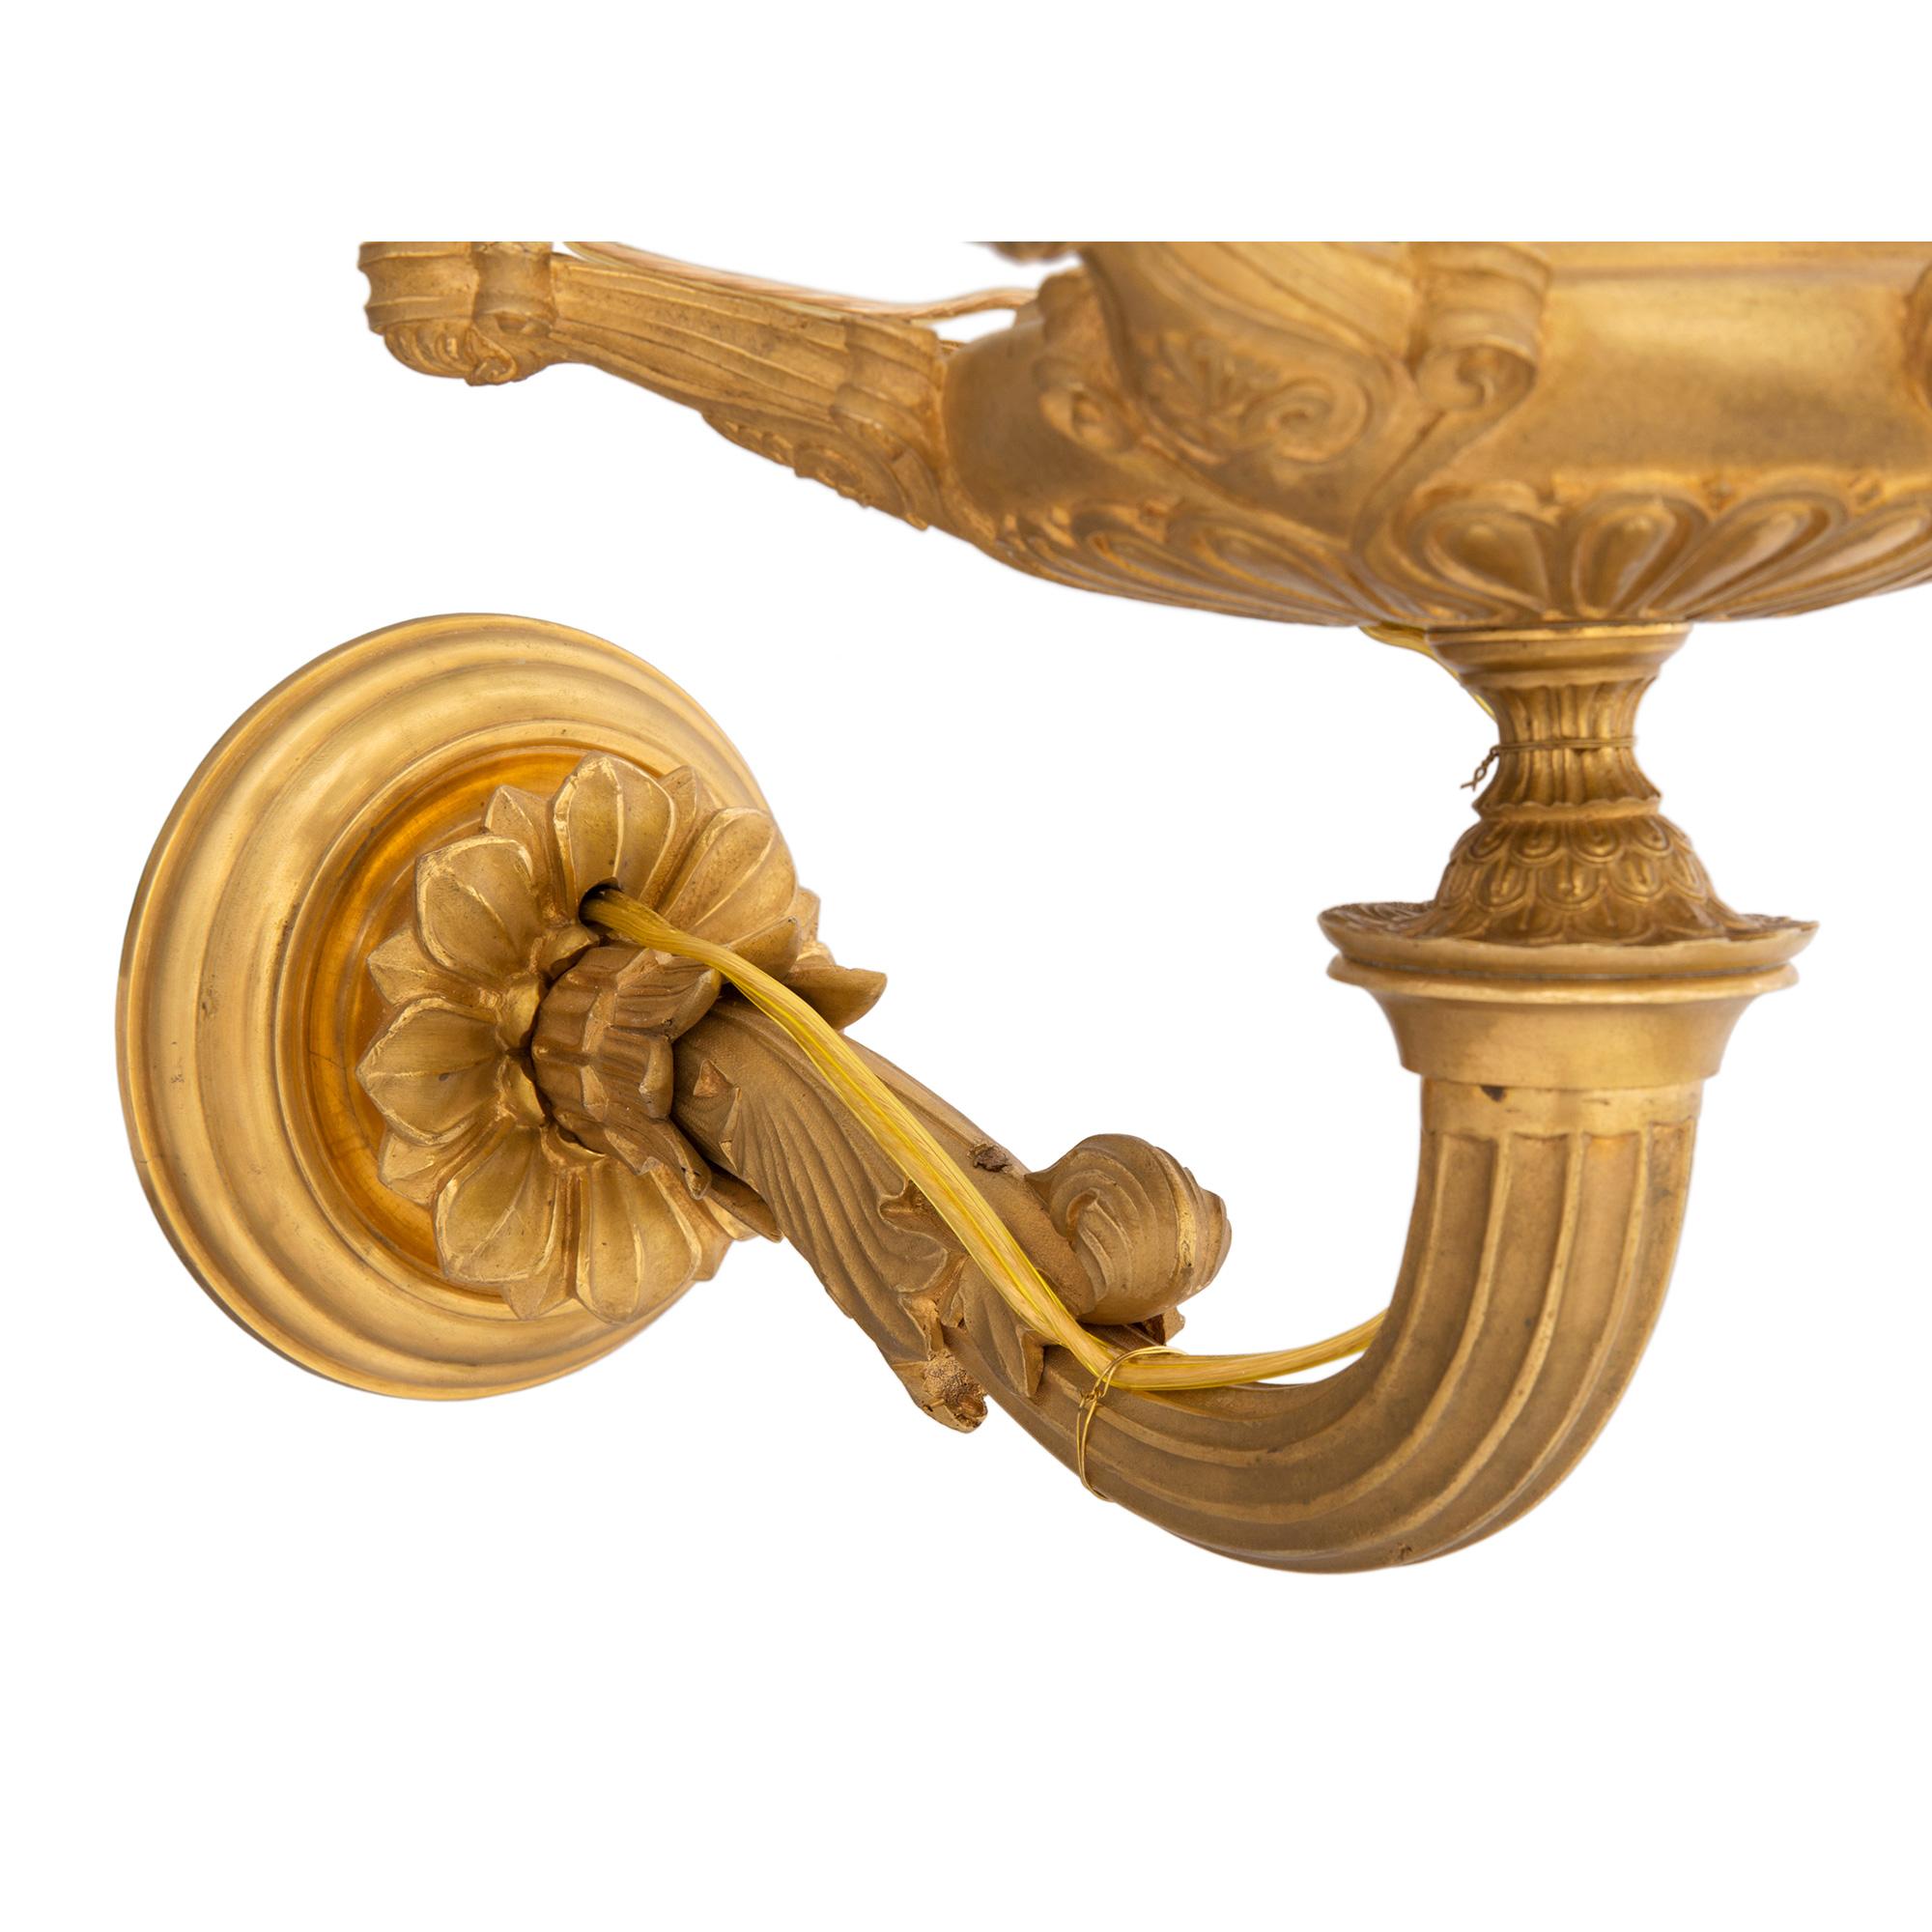 Pair of French Mid-19th Century Empire Style Six-Arm Ormolu Sconces For Sale 3